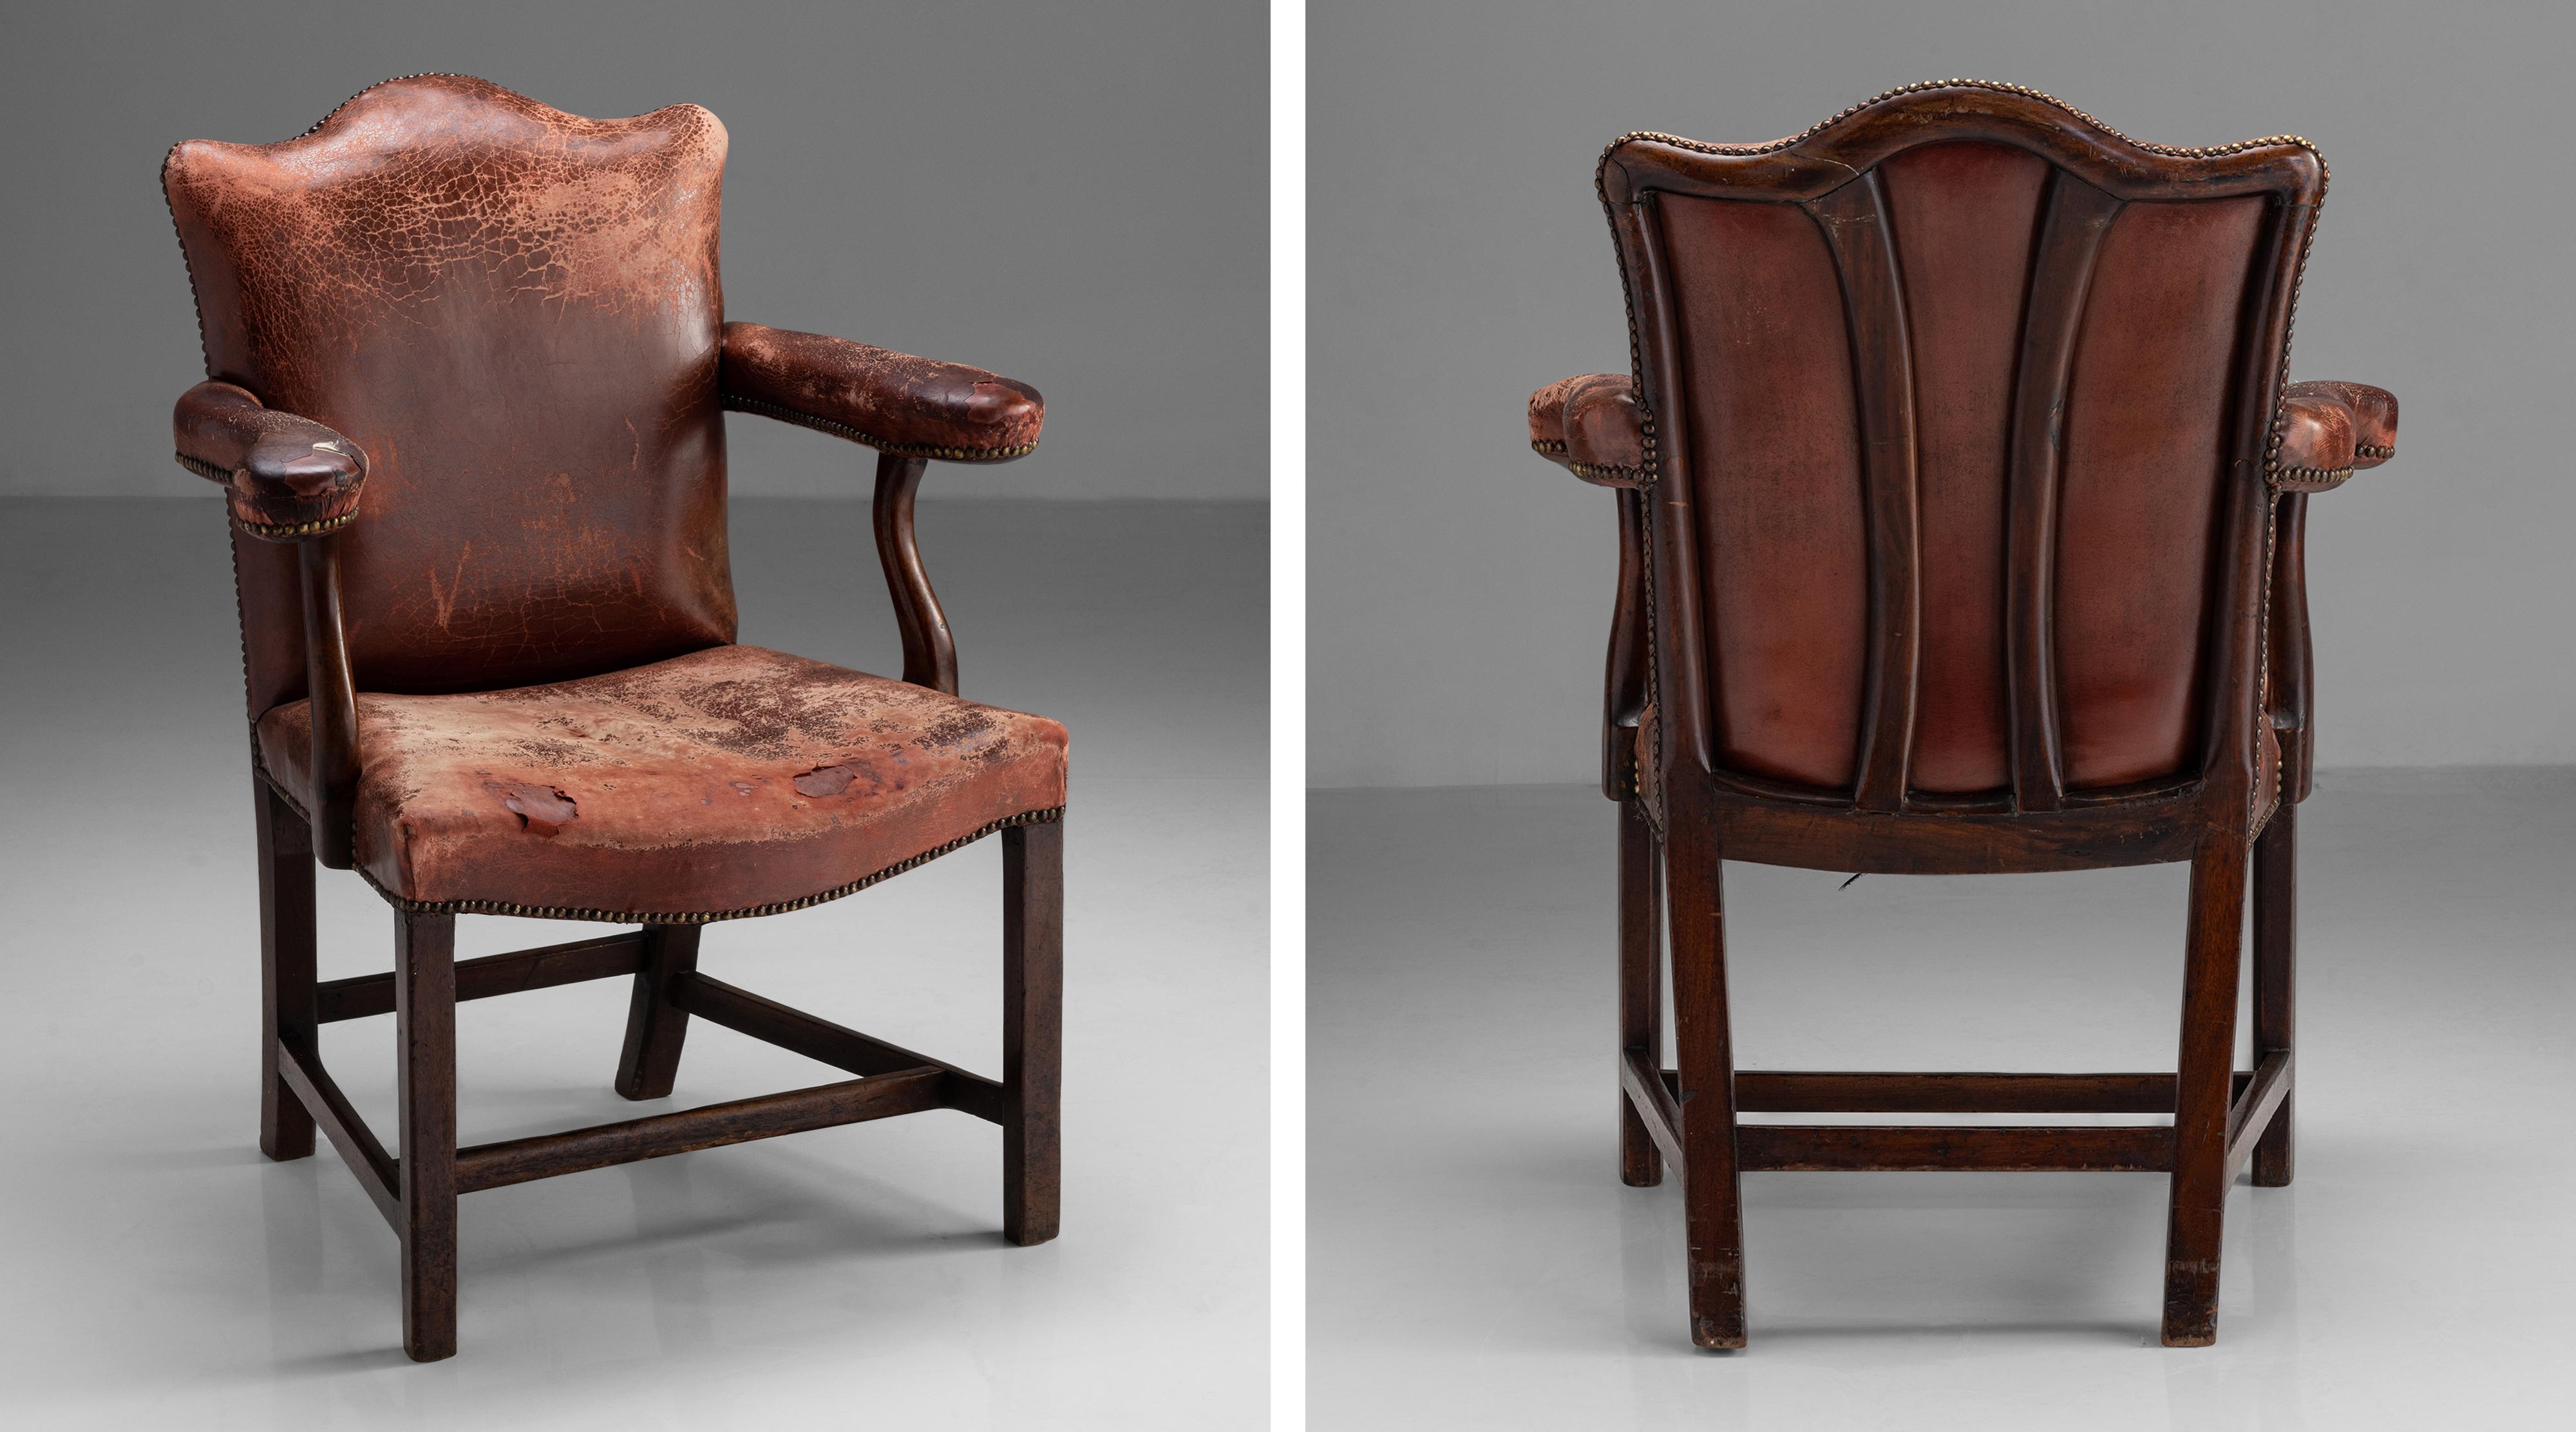 George III armchair,
England Circa 1830,
Constructed in mahogany with original leather upholstery. Originally from the private office of the late HSH Prince Rupert Loewenstein, former business manager of the Rolling Stones.